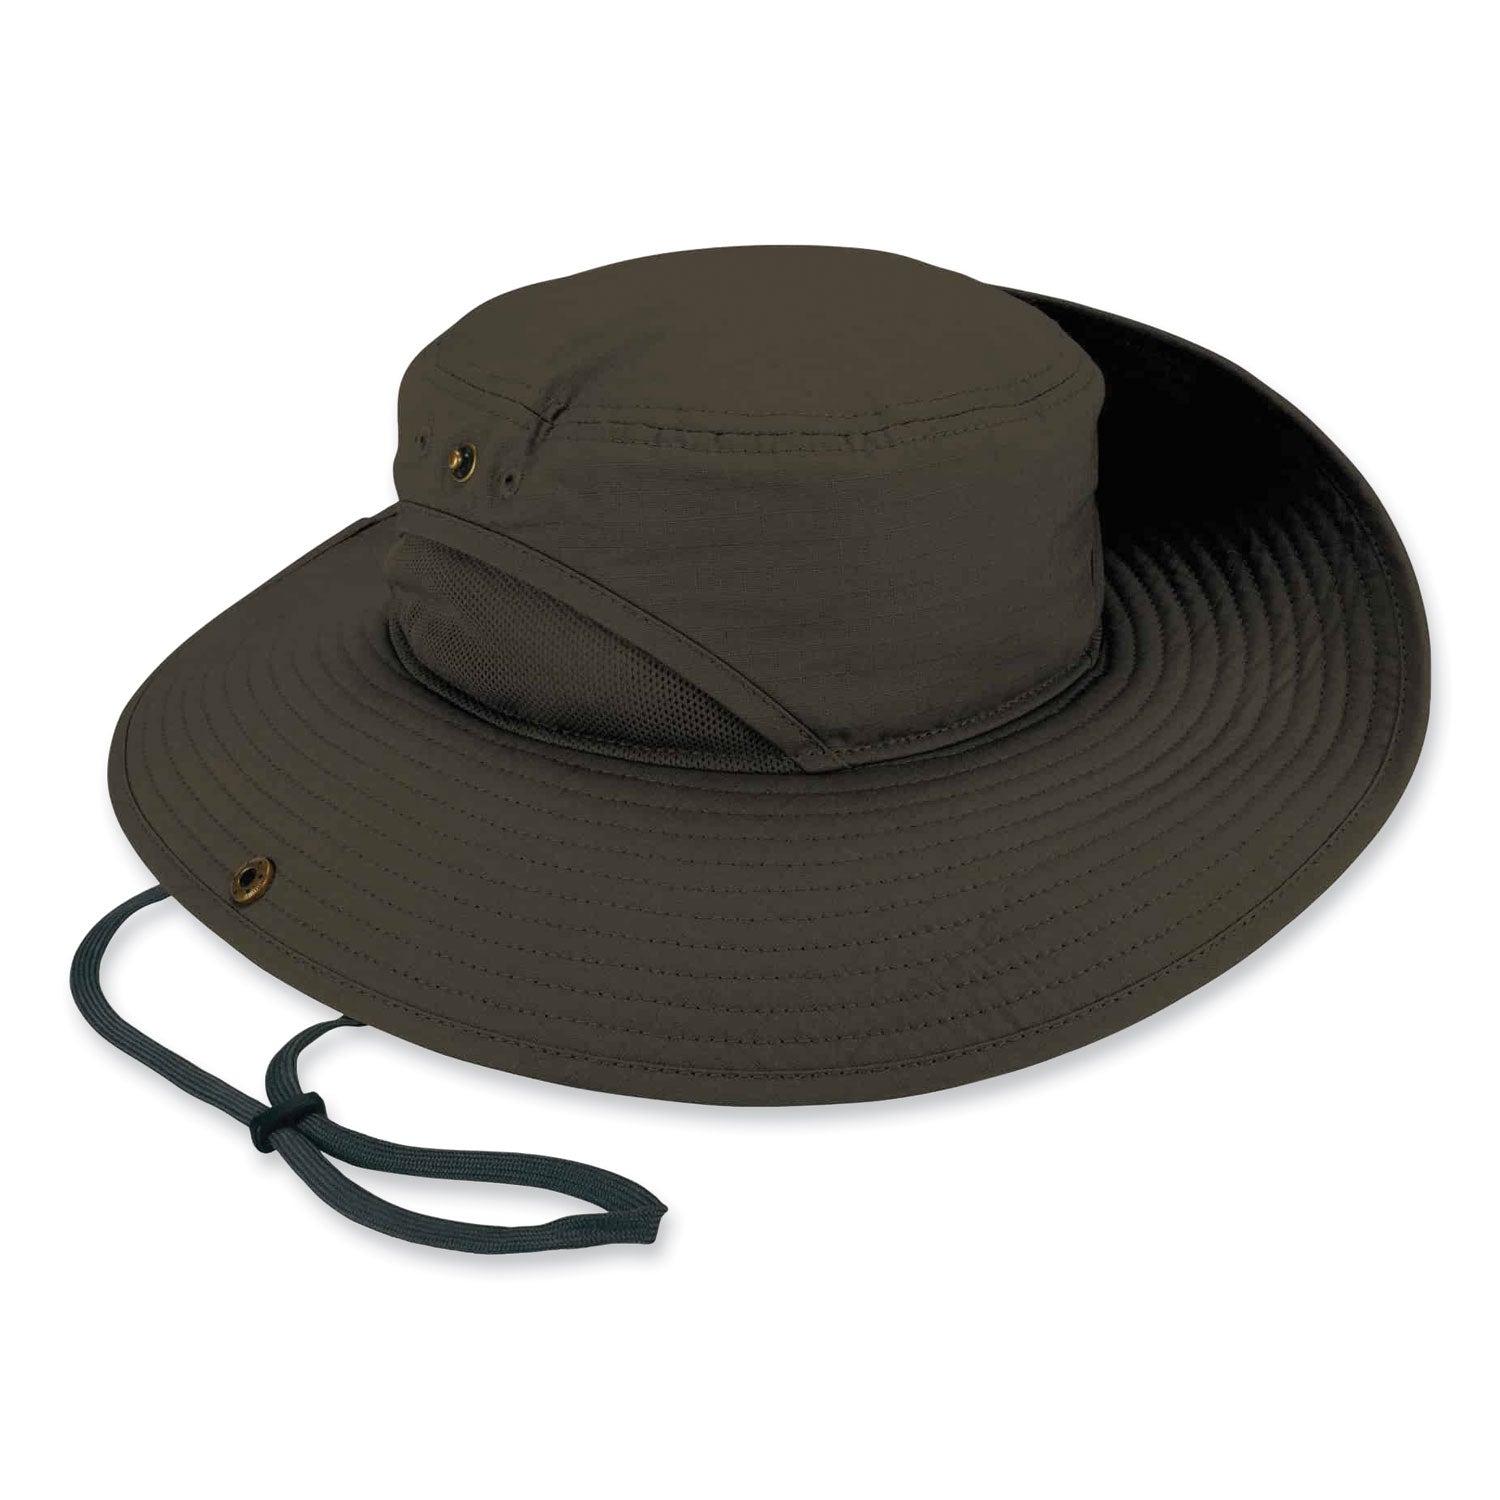 chill-its-8936-lightweight-mesh-paneling-ranger-hat-large-x-large-olive-ships-in-1-3-business-days_ego12603 - 1